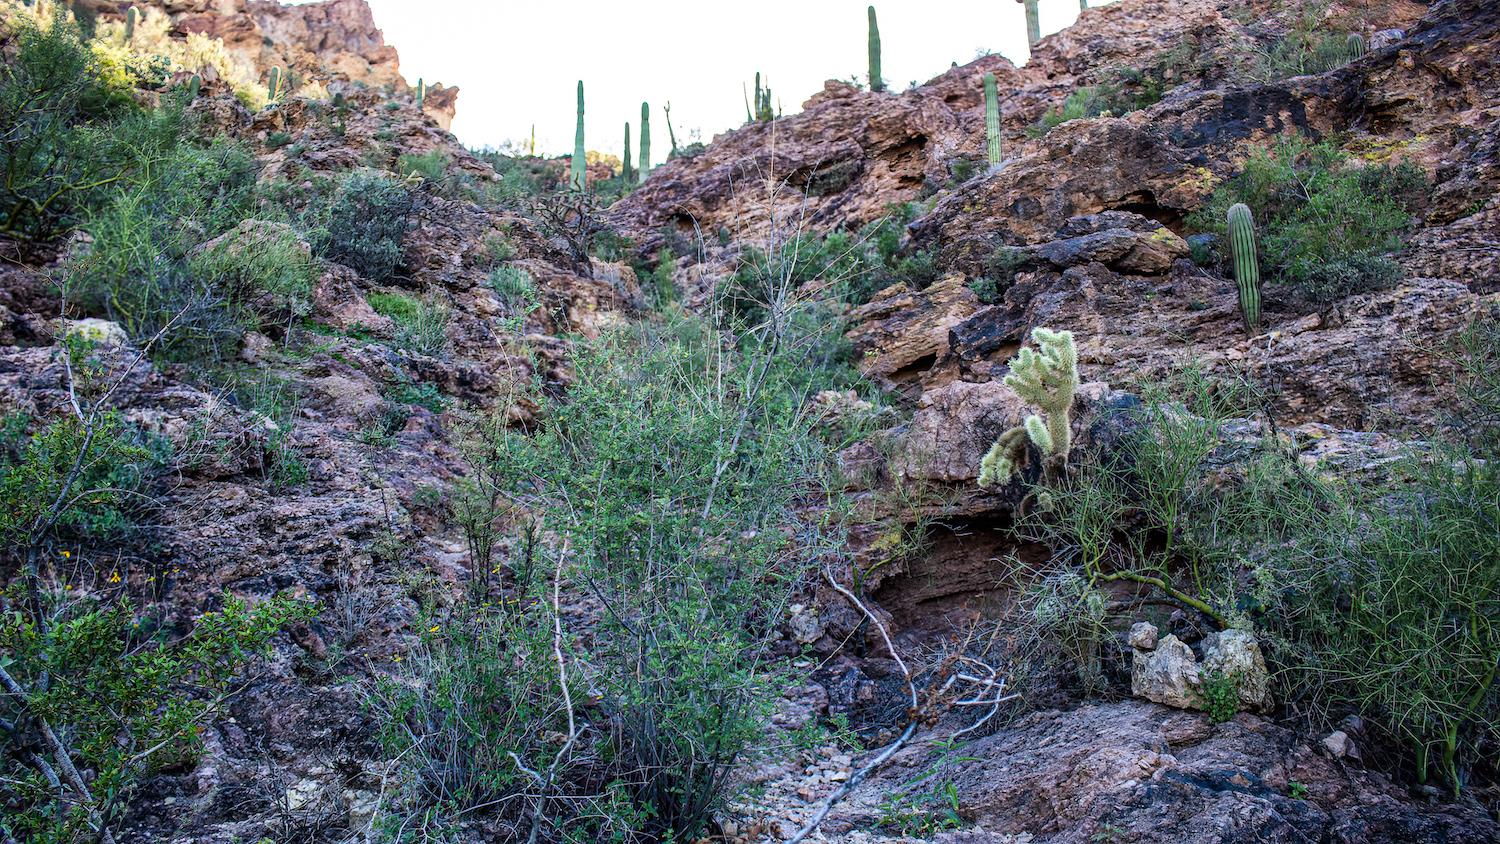 Trekkers across Organ Pipe Cactus National Monument would move from water source to water source in the Sonoran Desert. Dripping Springs is one active source that is an easy hike for those wanting to see a desert spring. Filter the water before drinking.